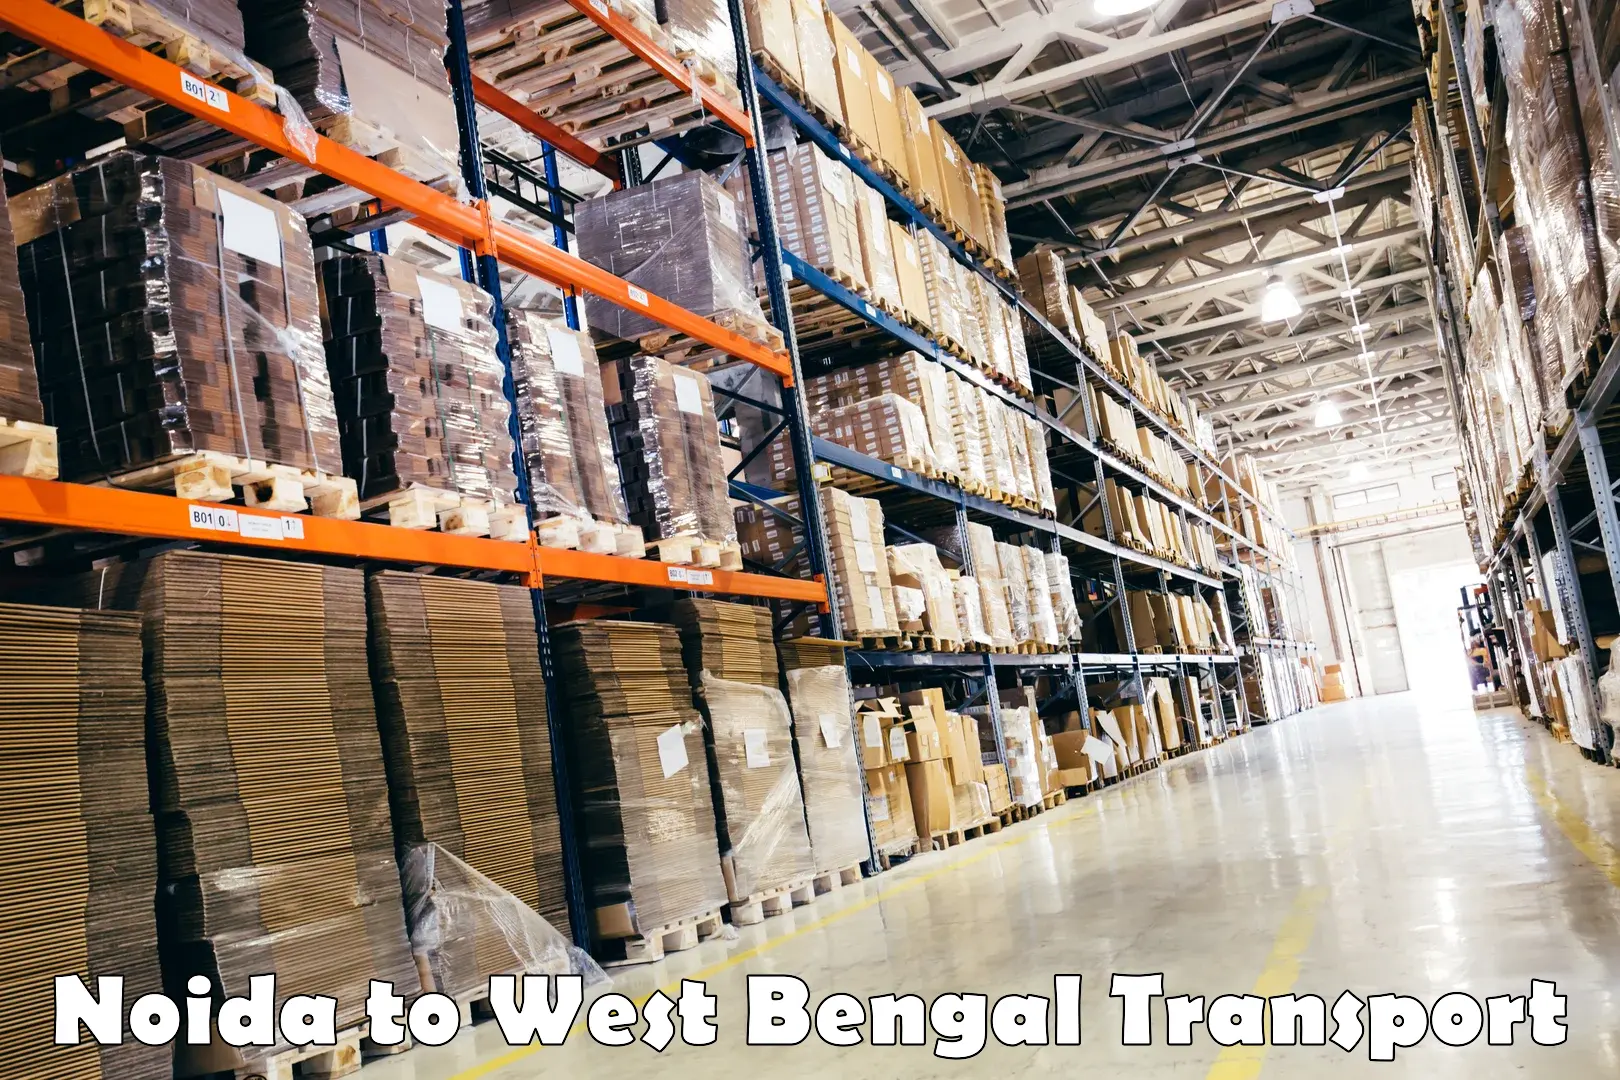 Truck transport companies in India Noida to West Bengal